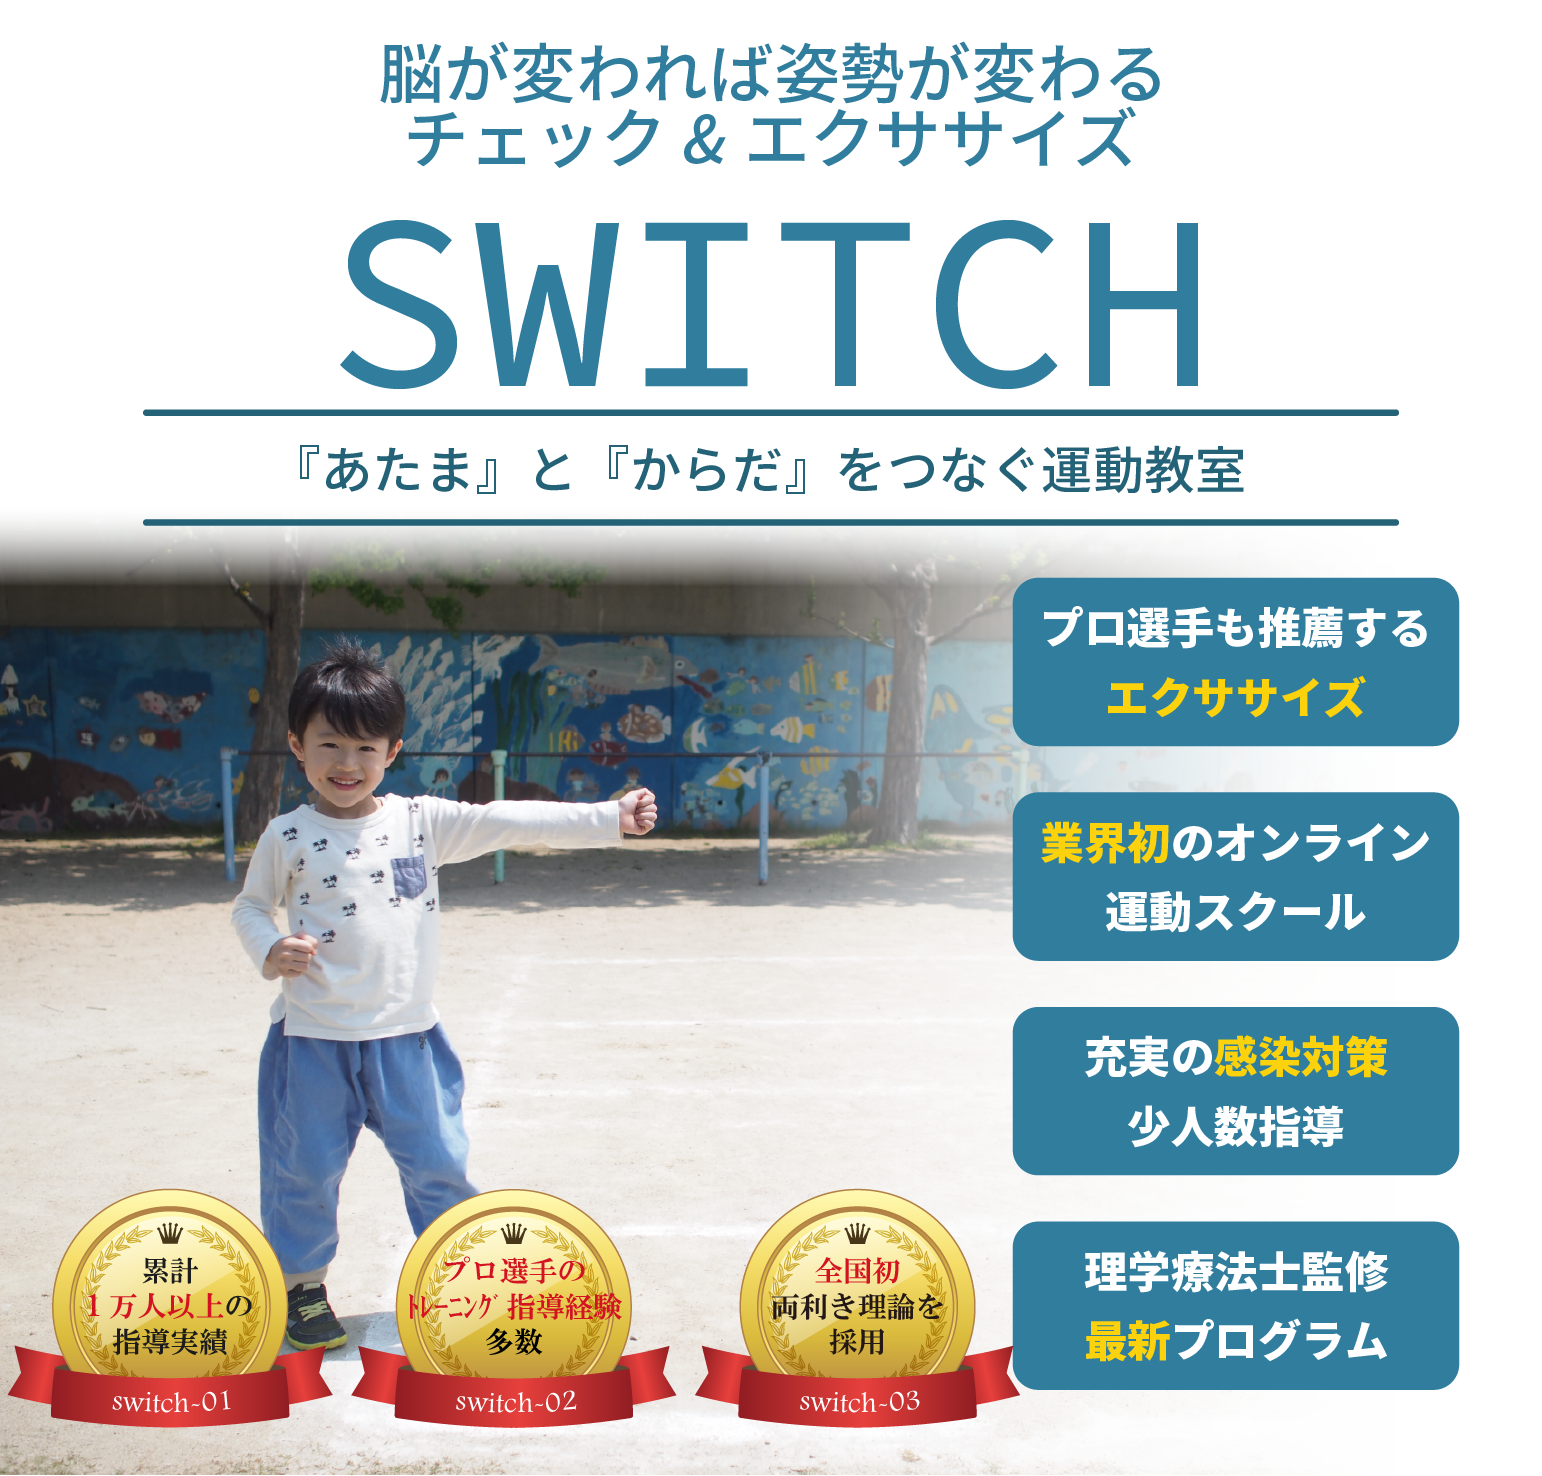 SWITCH_アートボード-1-のコピー-3.png